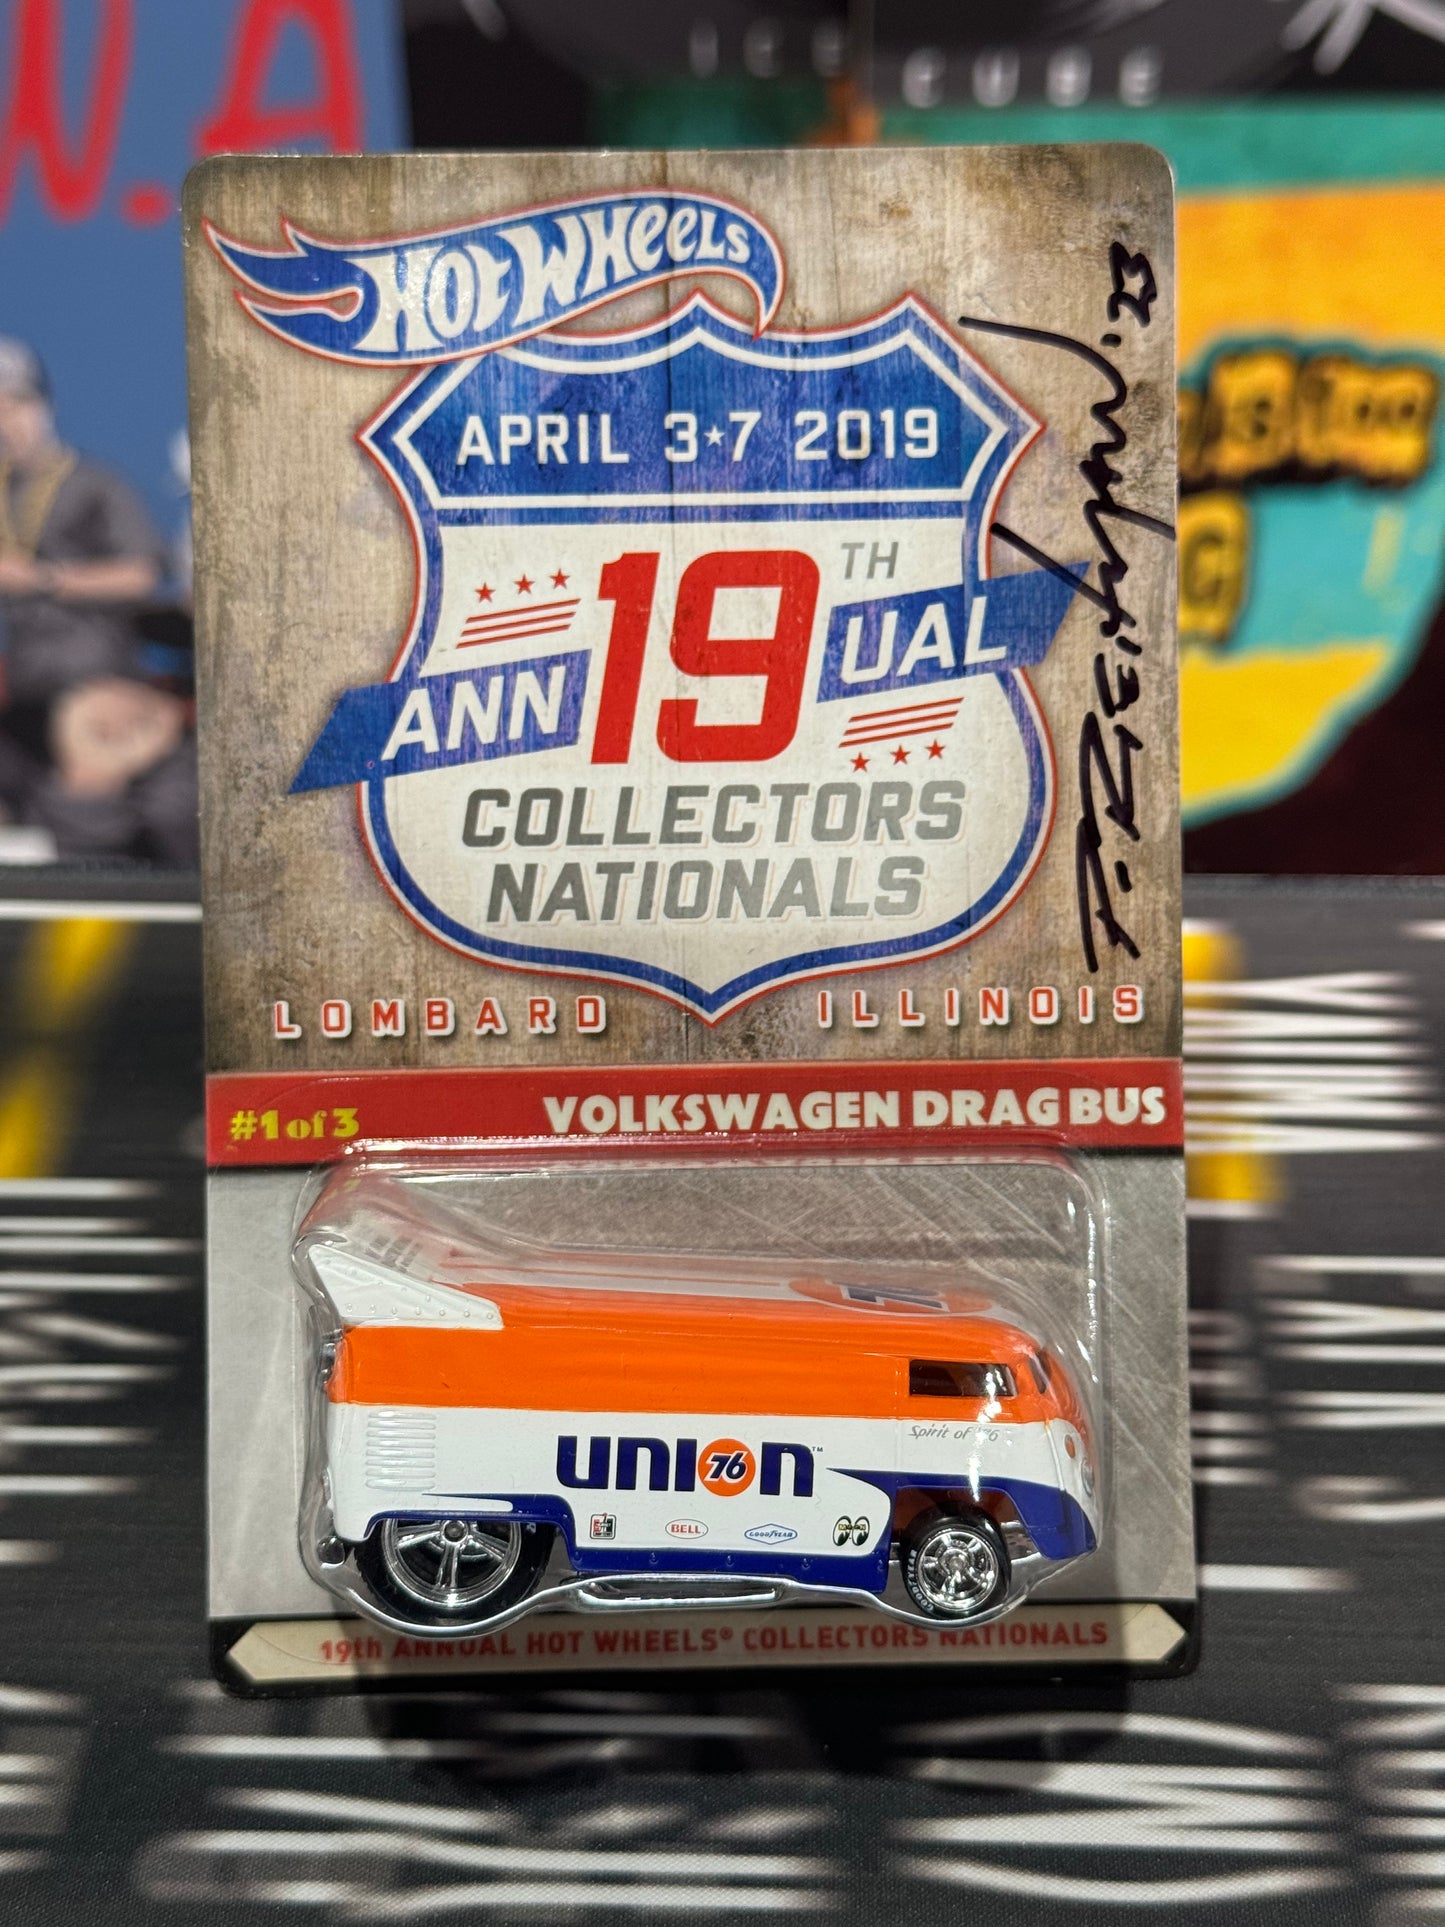 Hot Wheels 19th Annual Collectors Nationals Volkswagen Drag Bus (Signed by Phil Riehlman)